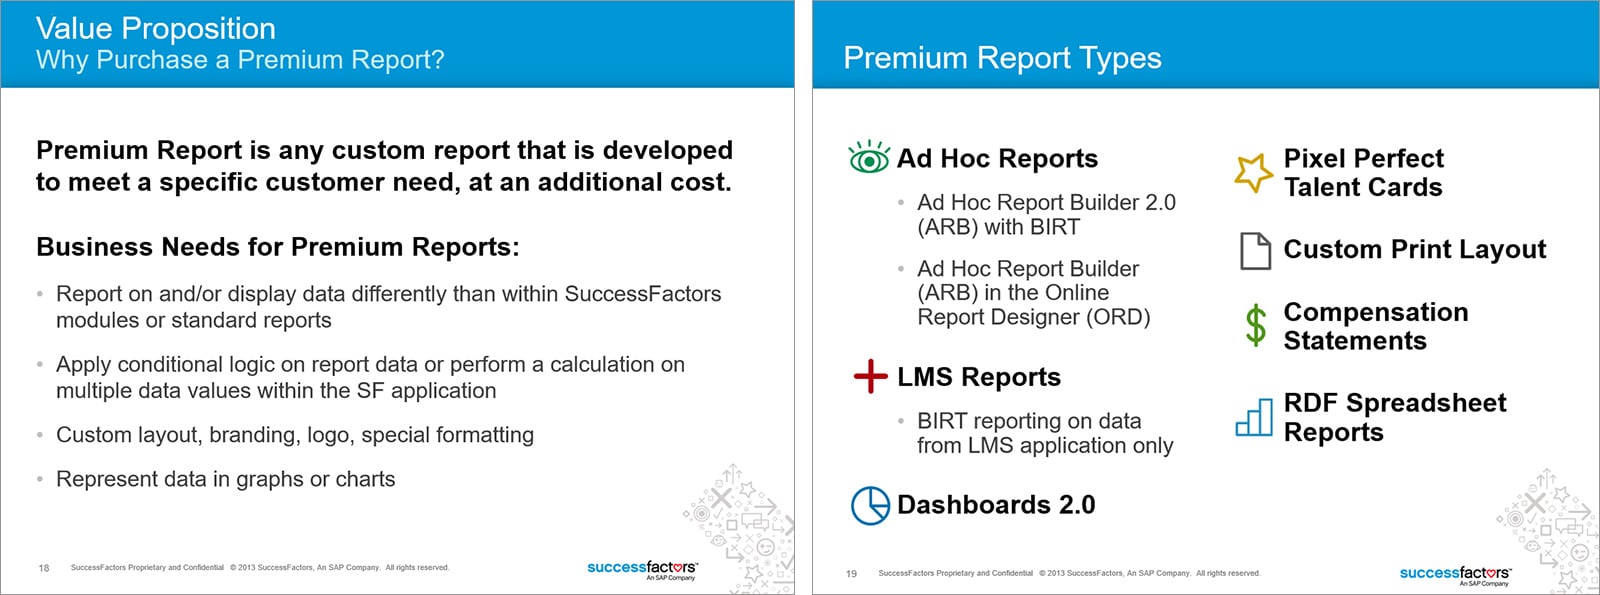 Value Proposition and Premium Report Types